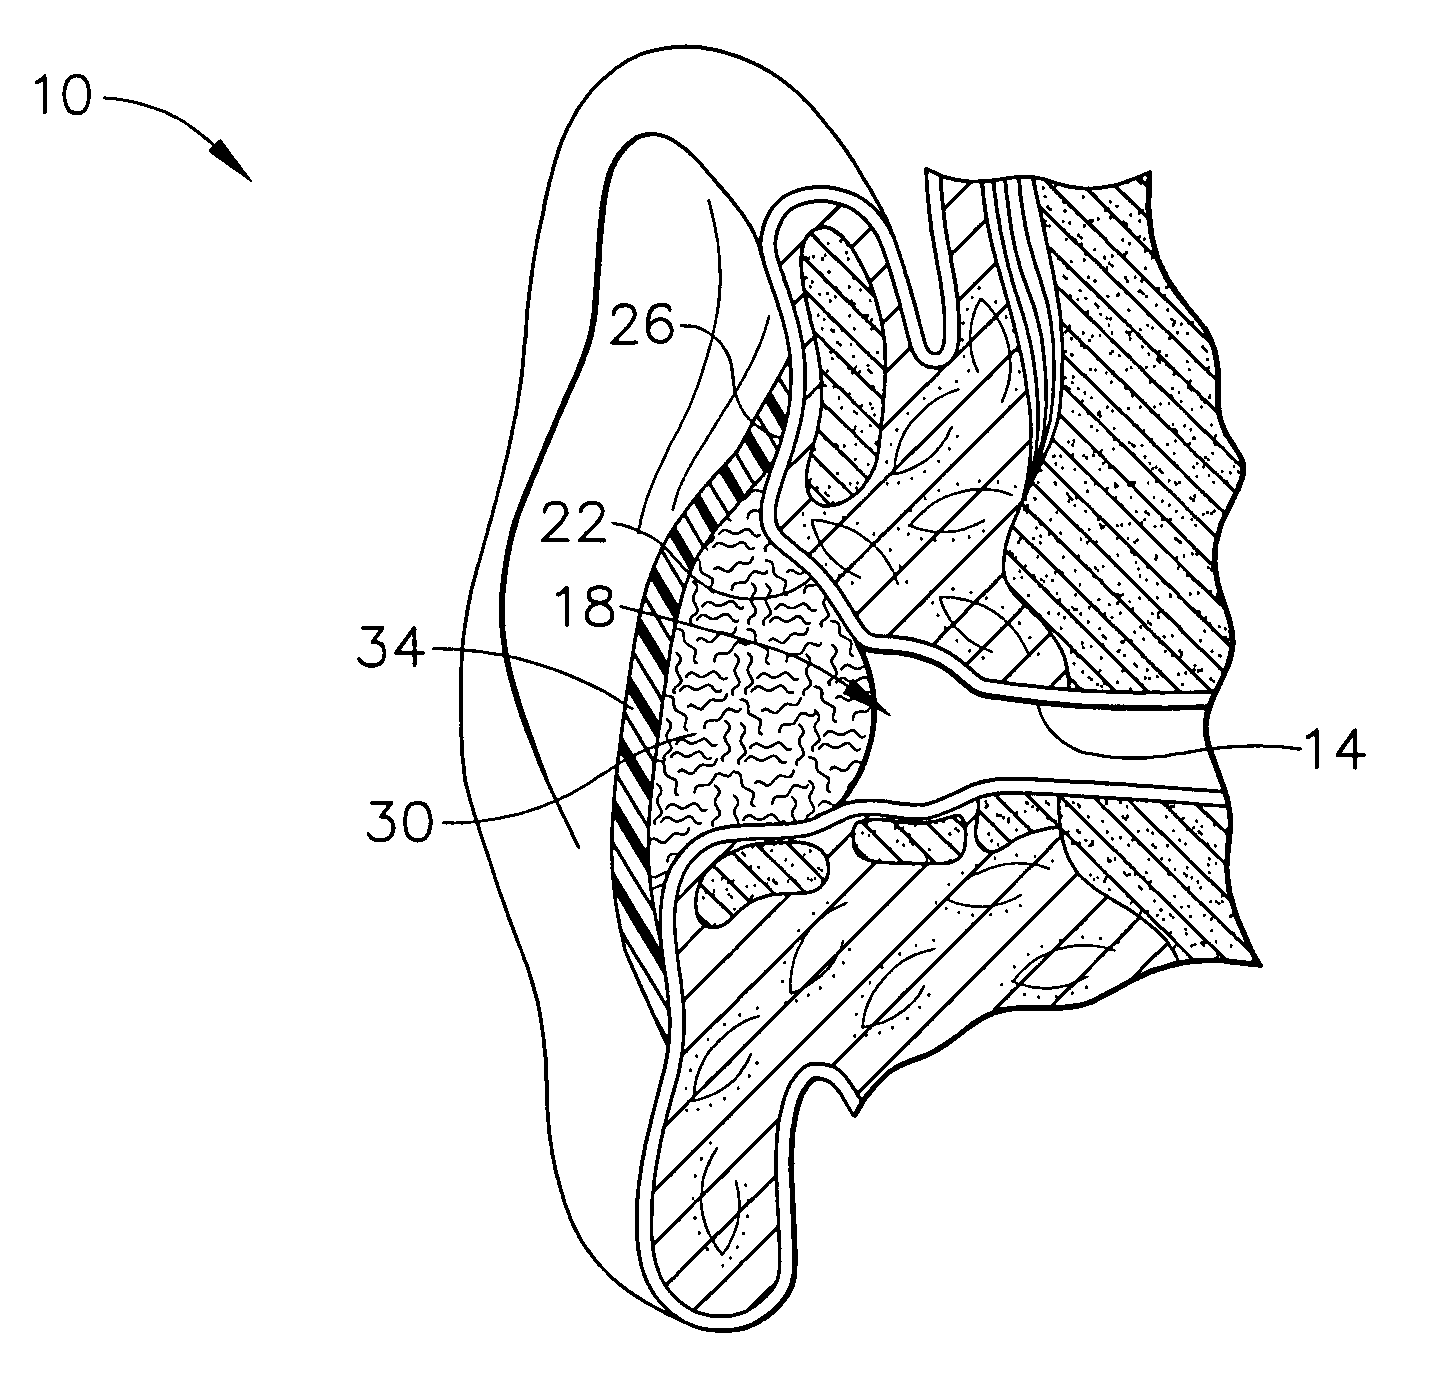 Method for forming occlusive barrier over ear canal and kit for providing same